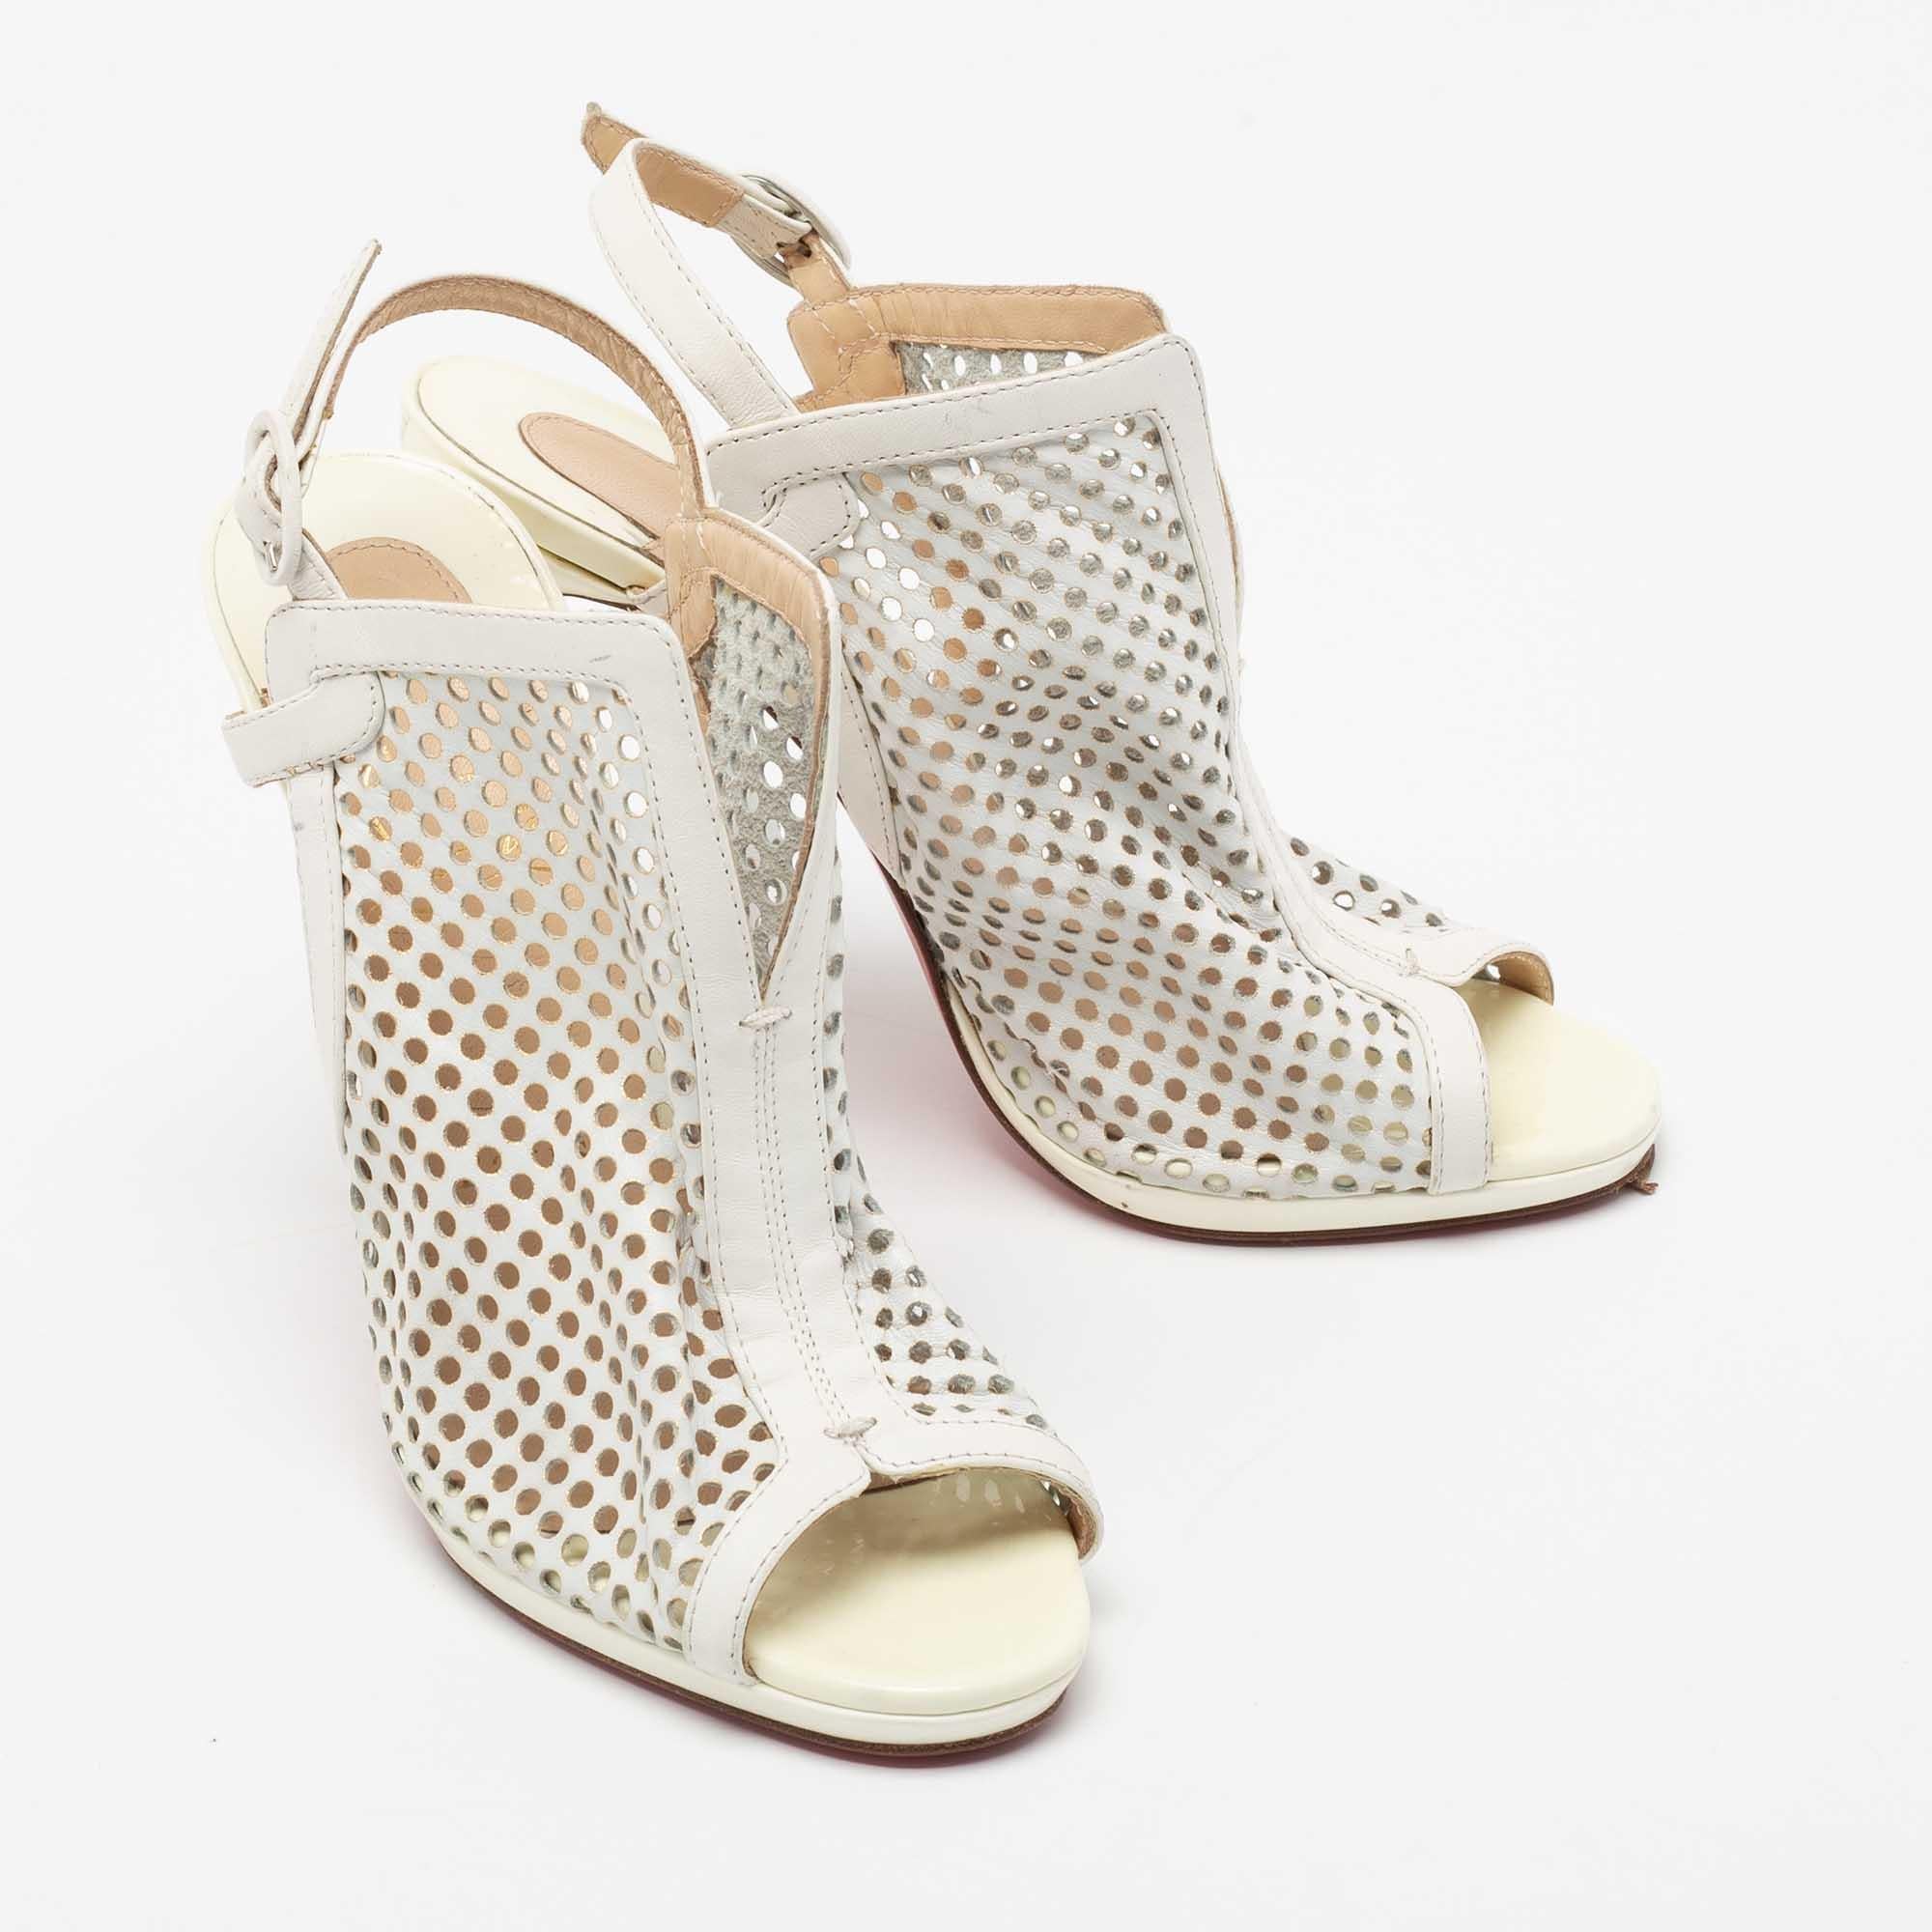 Christian Louboutin White Leather Escriminette Slingback Booties Size 38 1